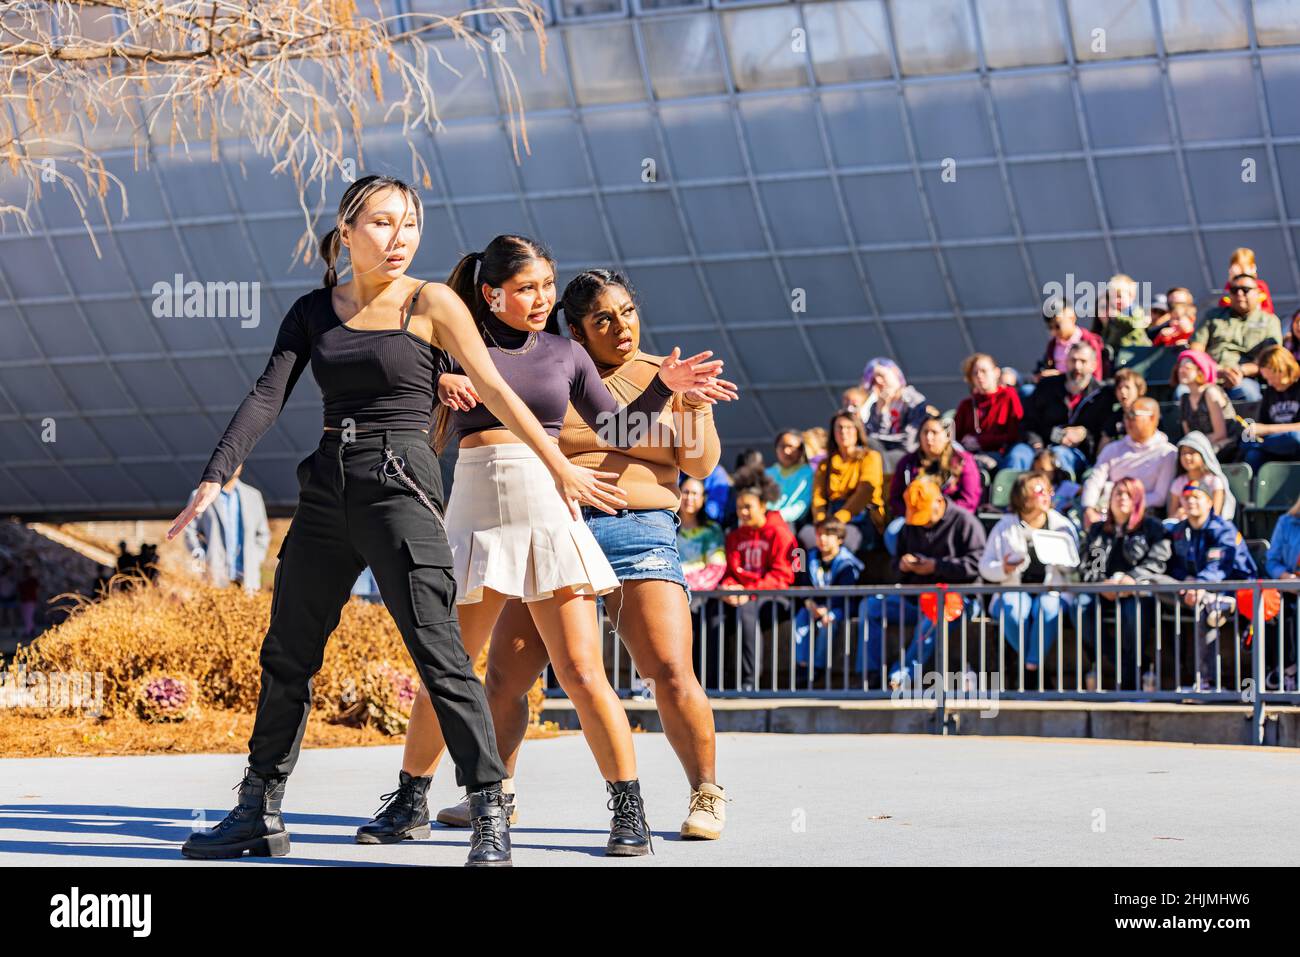 Oklahoma, JAN 29 2022 - Sunny view of the K-POP girl group performance in Lunar New Year Festival Foto Stock